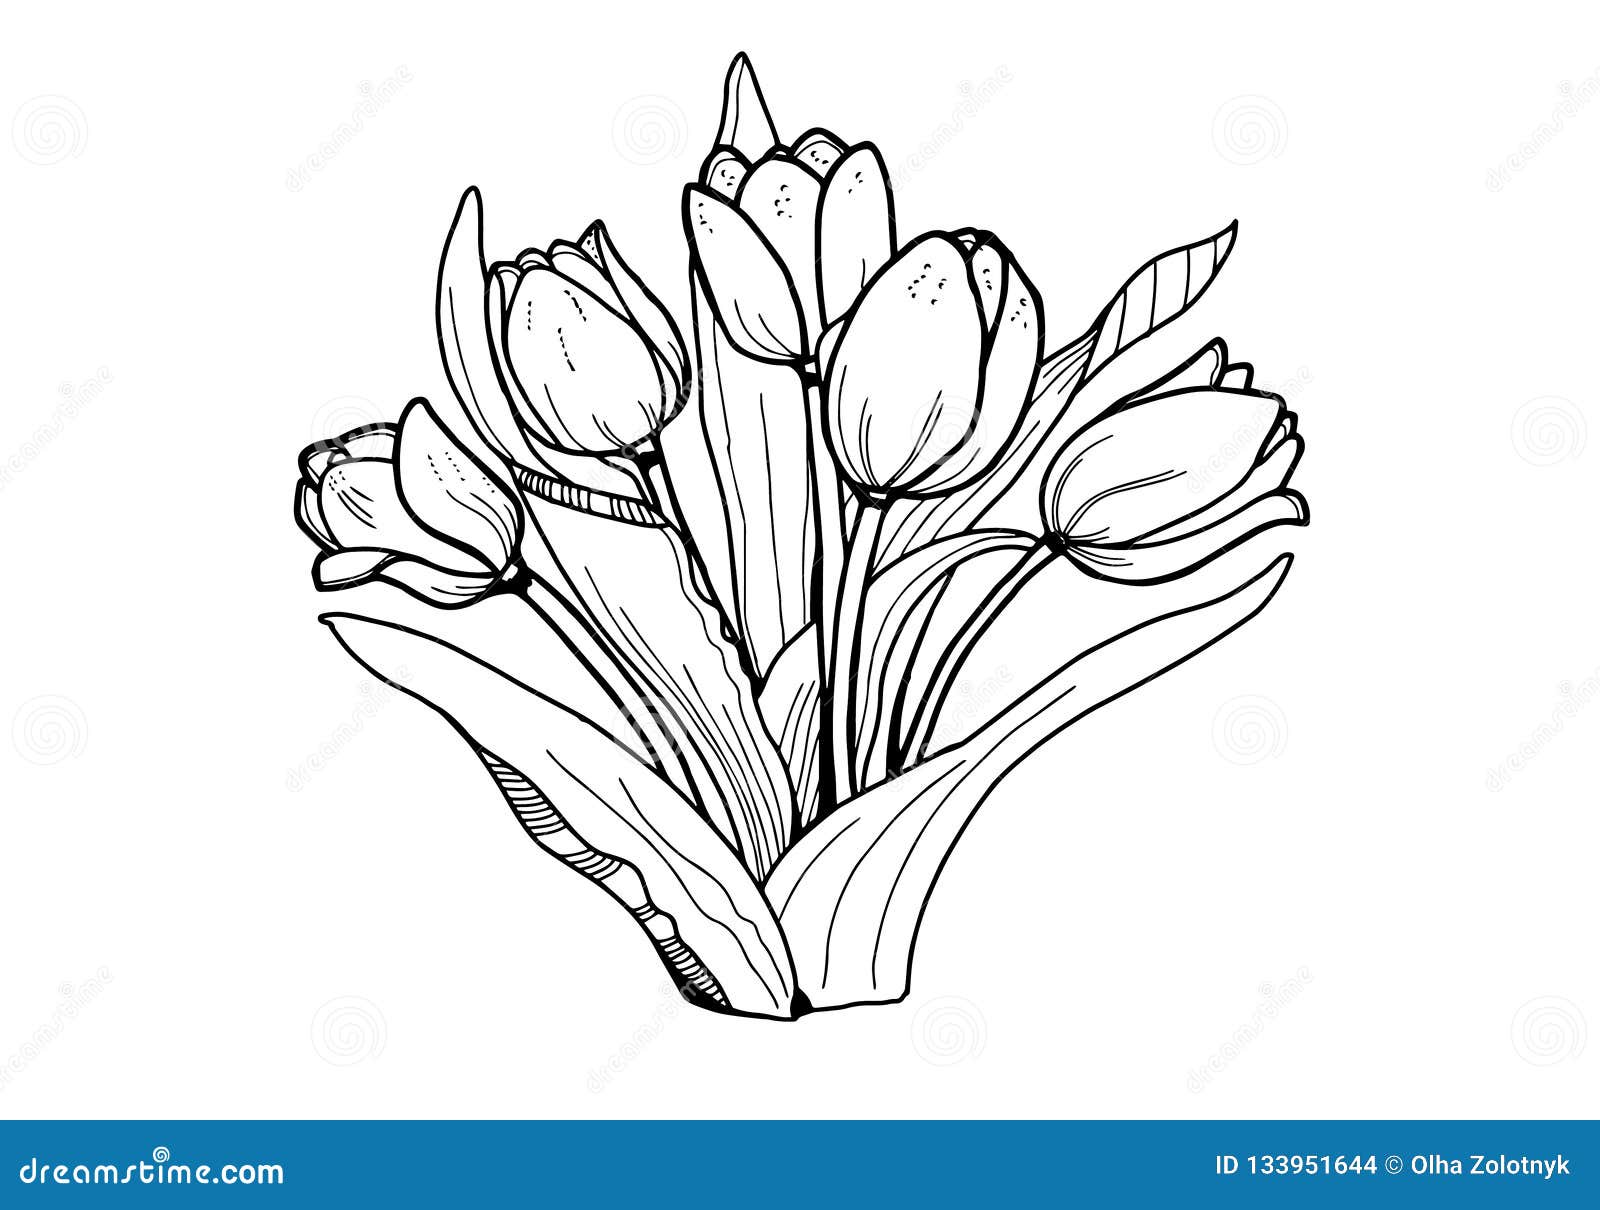 Flowers Tulips. Black and White Image . Coloring for Adults Stock ...